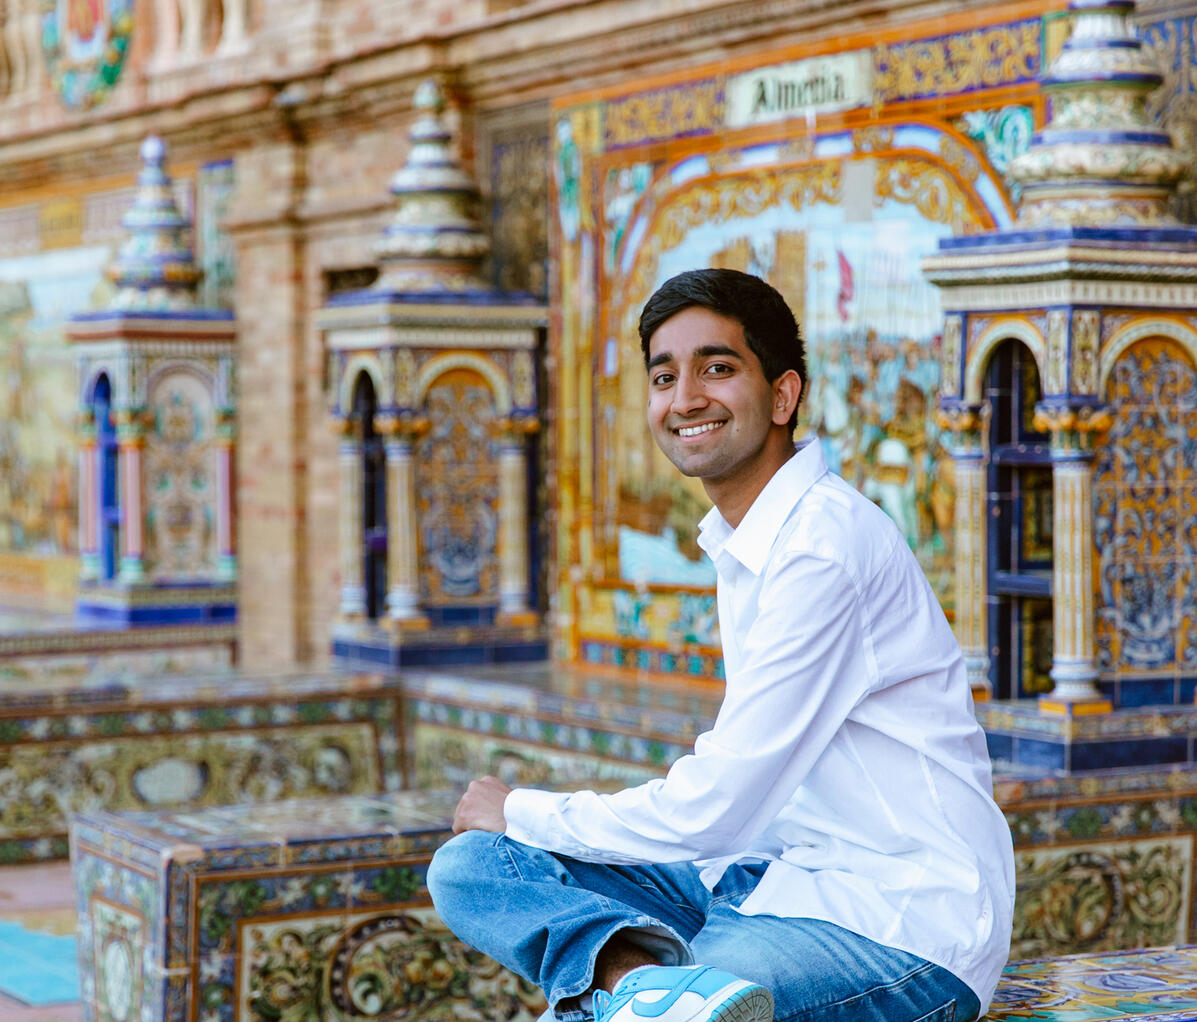 Class of 2023: With an expanding world view, Ishaan Nandwani sees medicine as service